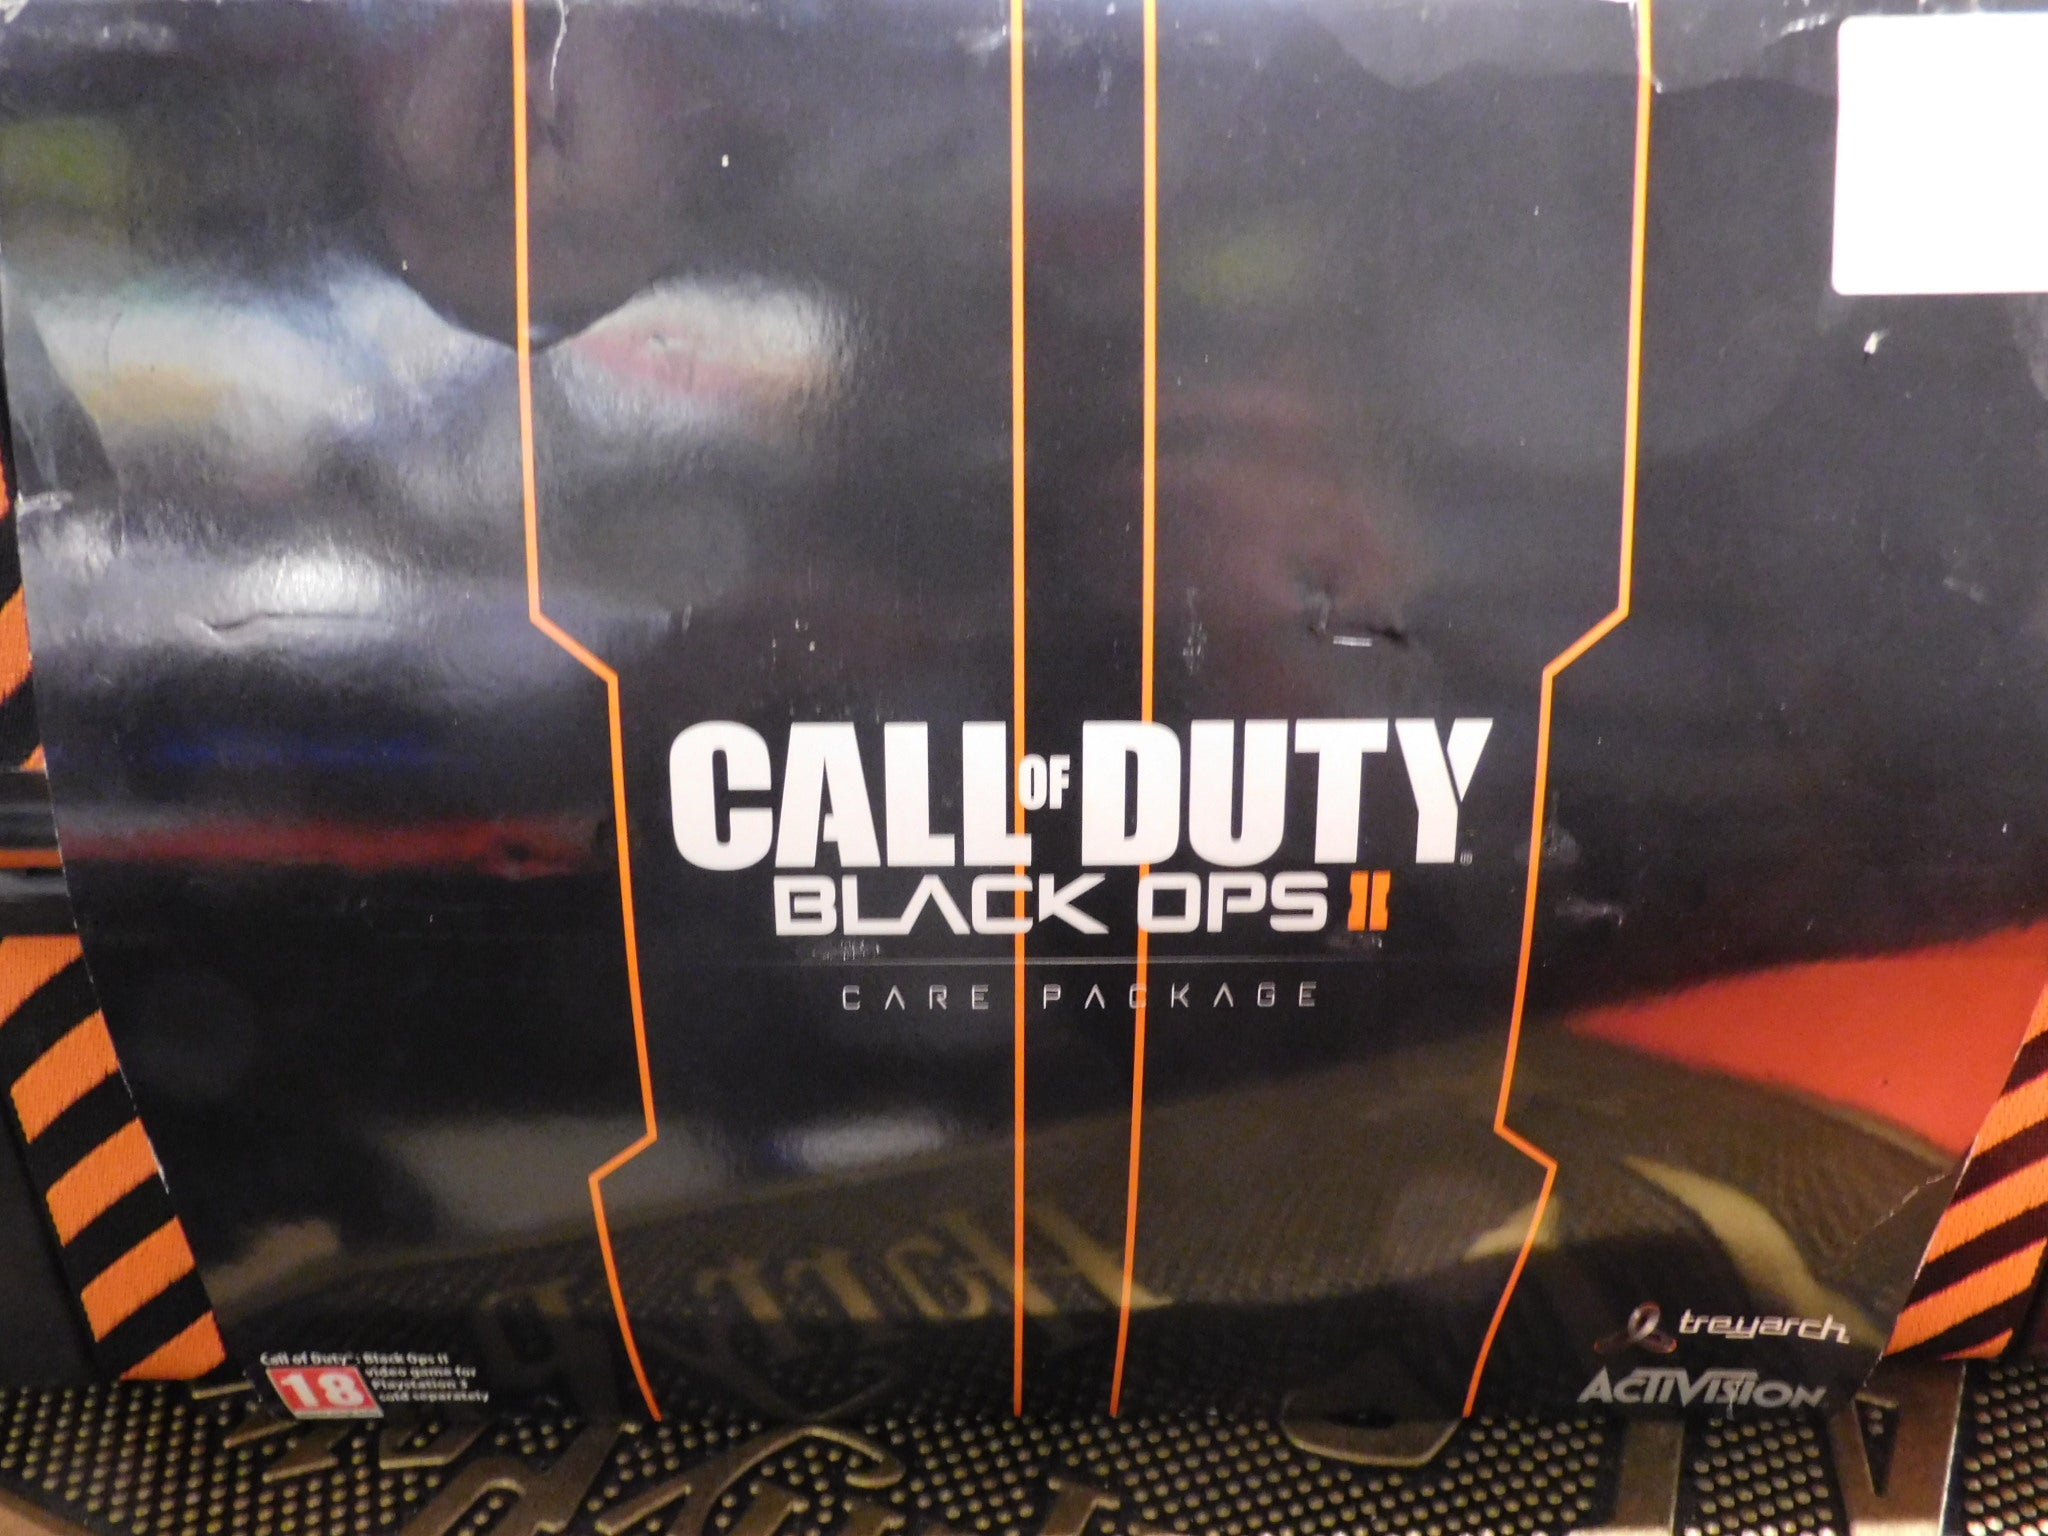 CALL OF DUTY BLACK OPS II CARE PACKAGE